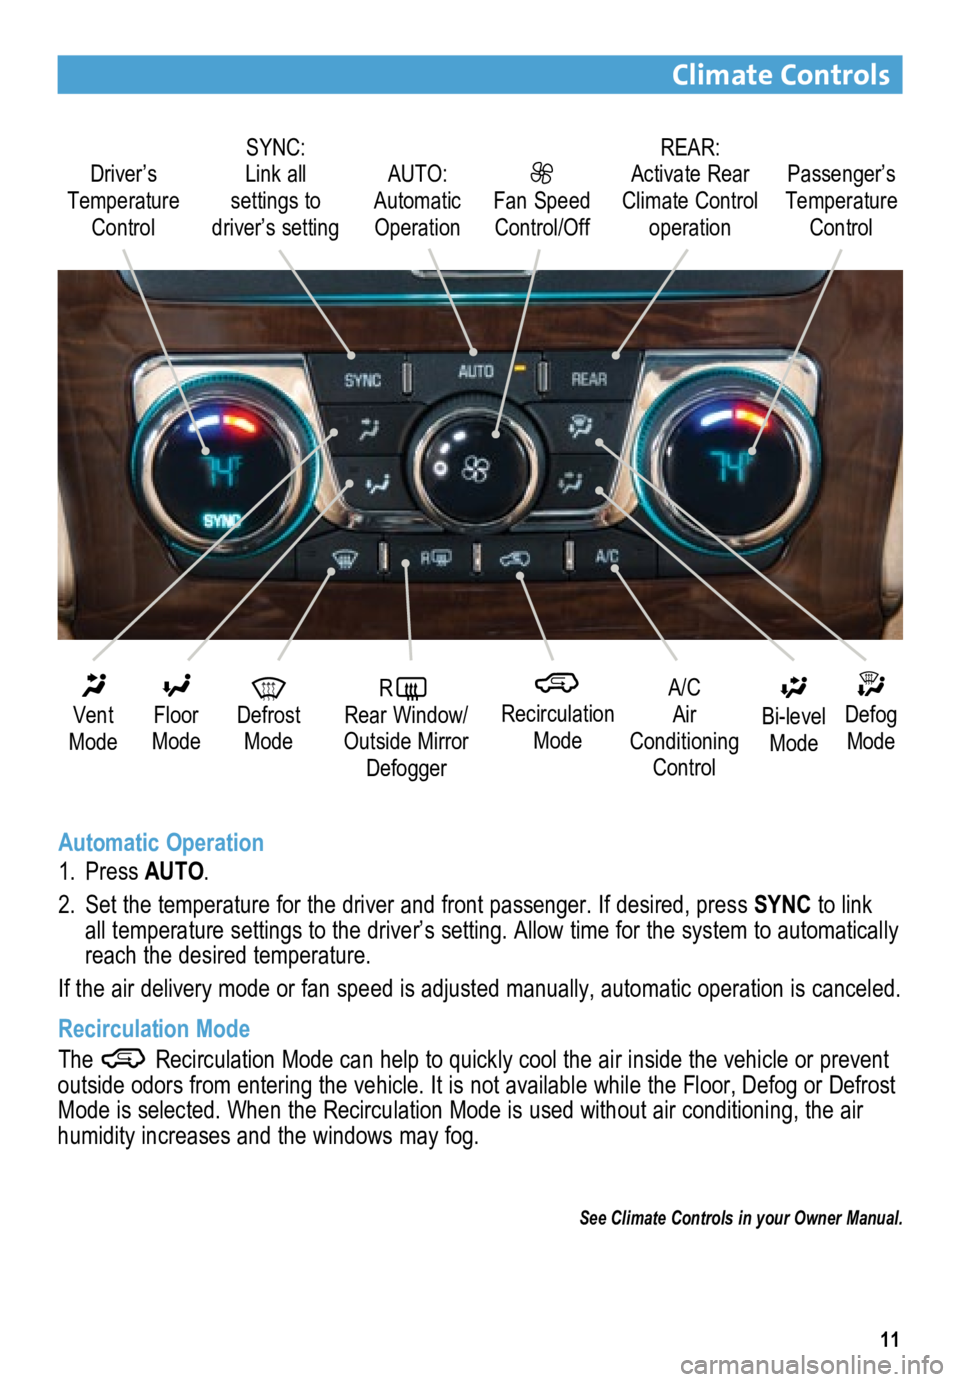 BUICK ENCLAVE 2015  Get To Know Guide 11
Climate Controls
Automatic Operation
1. Press AUTO.
2.  Set the temperature for the driver and front passenger. If desired, pres\
s SYNC  to link 
all temperature settings to the driver’s setting